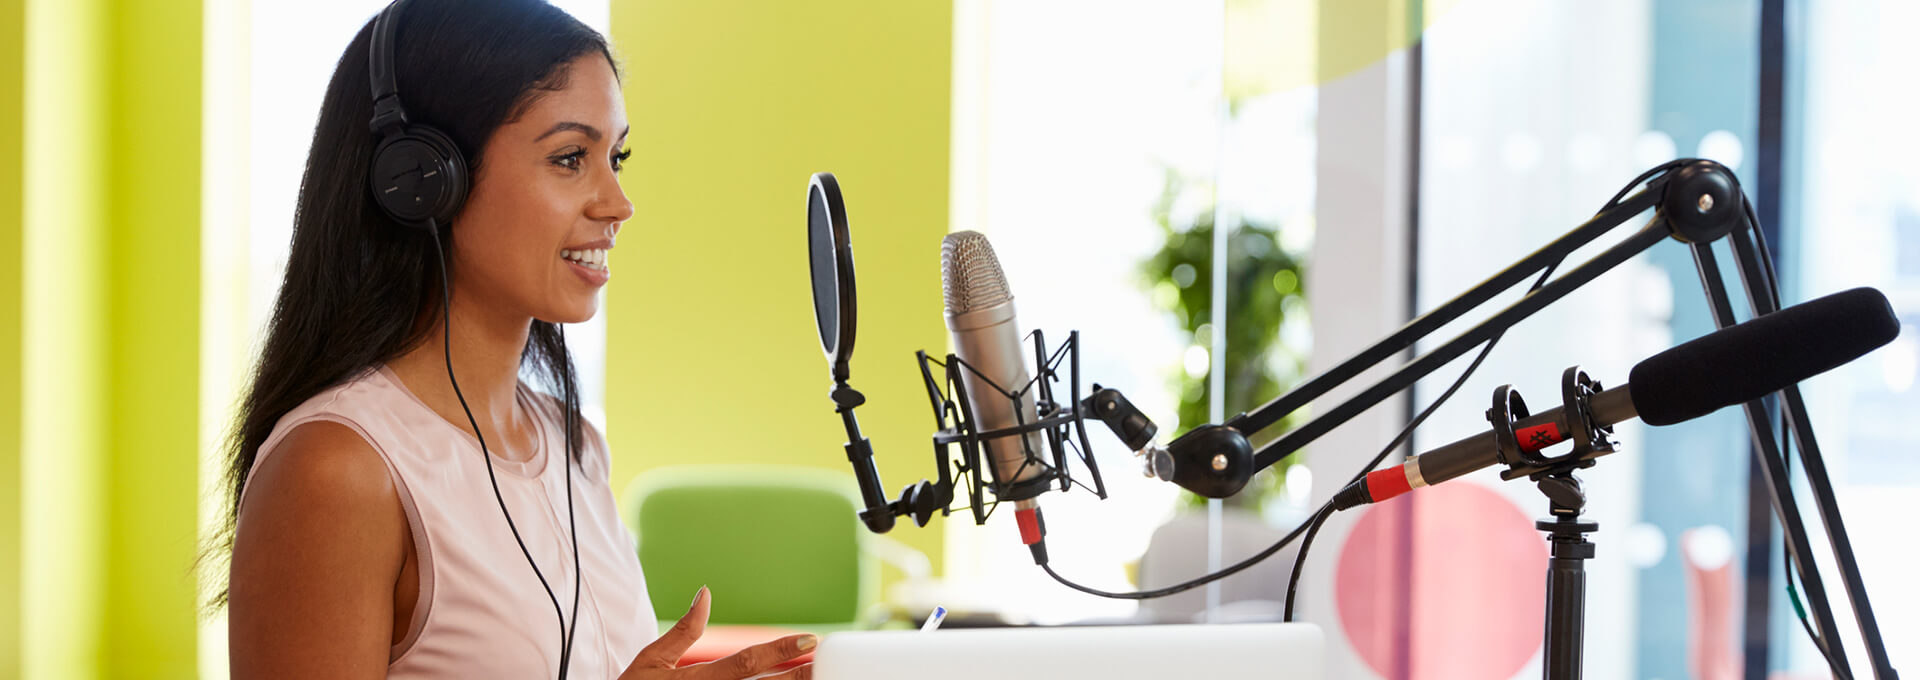 How to Launch a Podcast: Best Practices to Get Started 